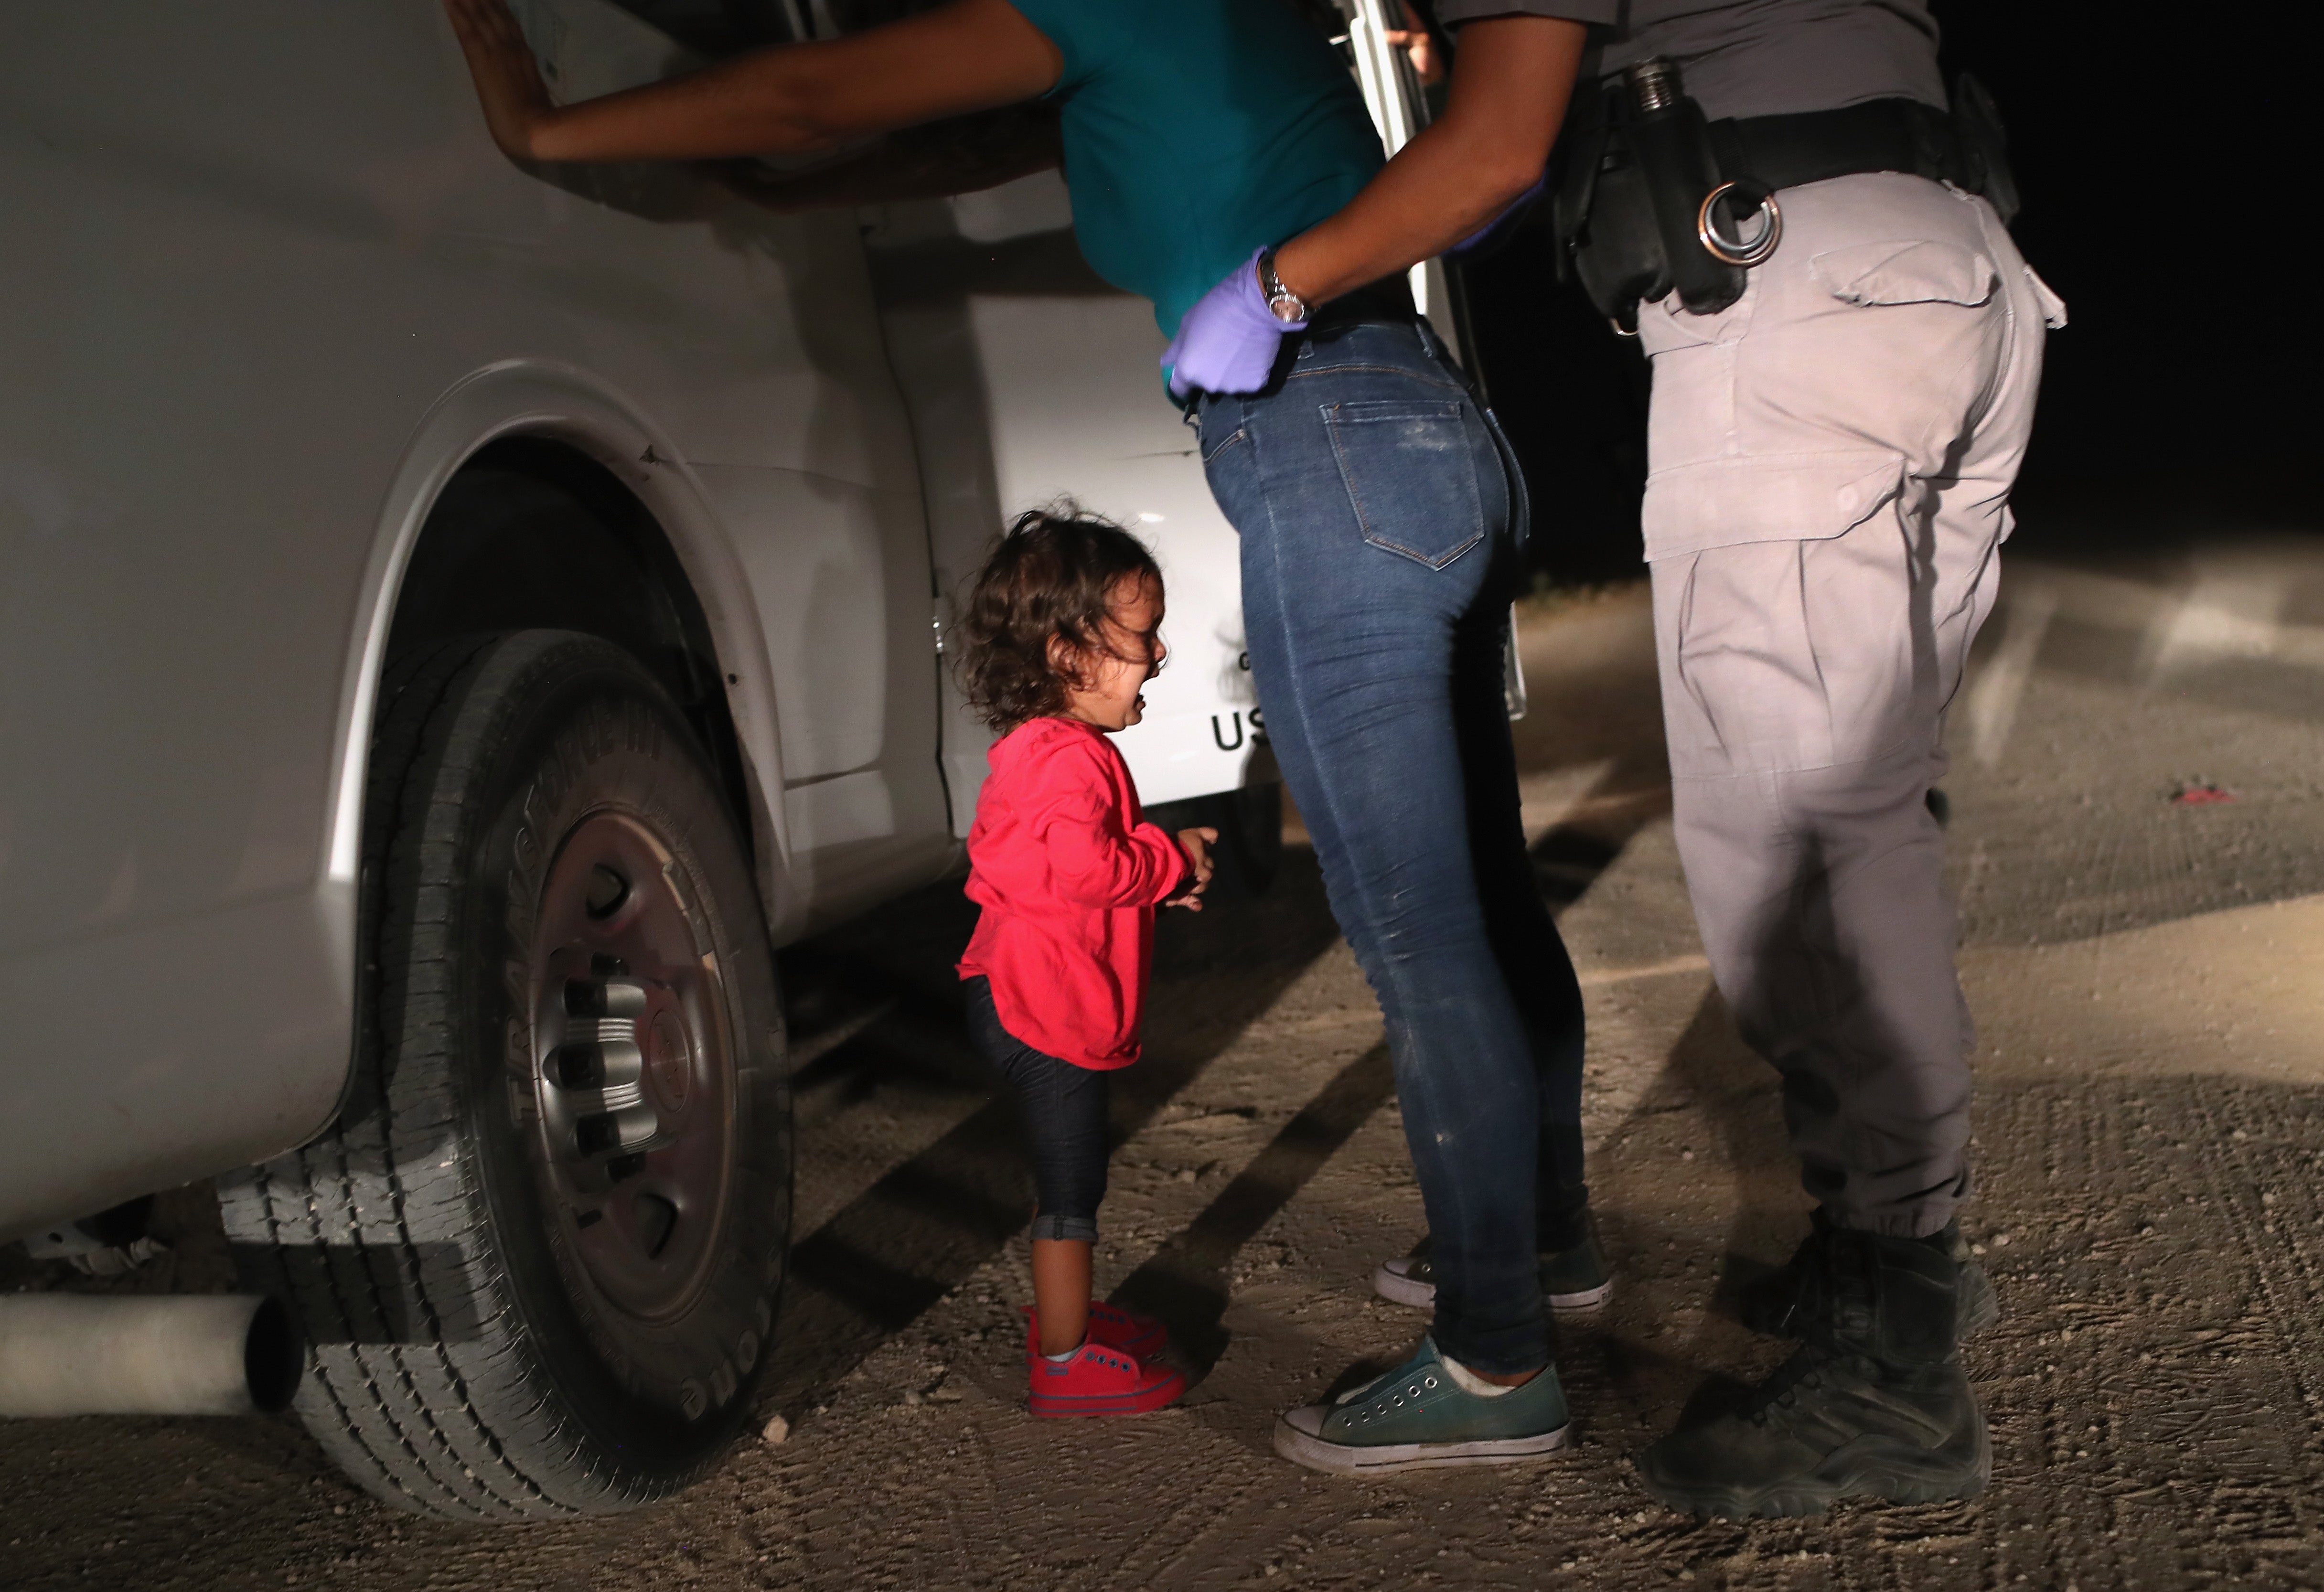 Around 1,000 parents remain separated from their children